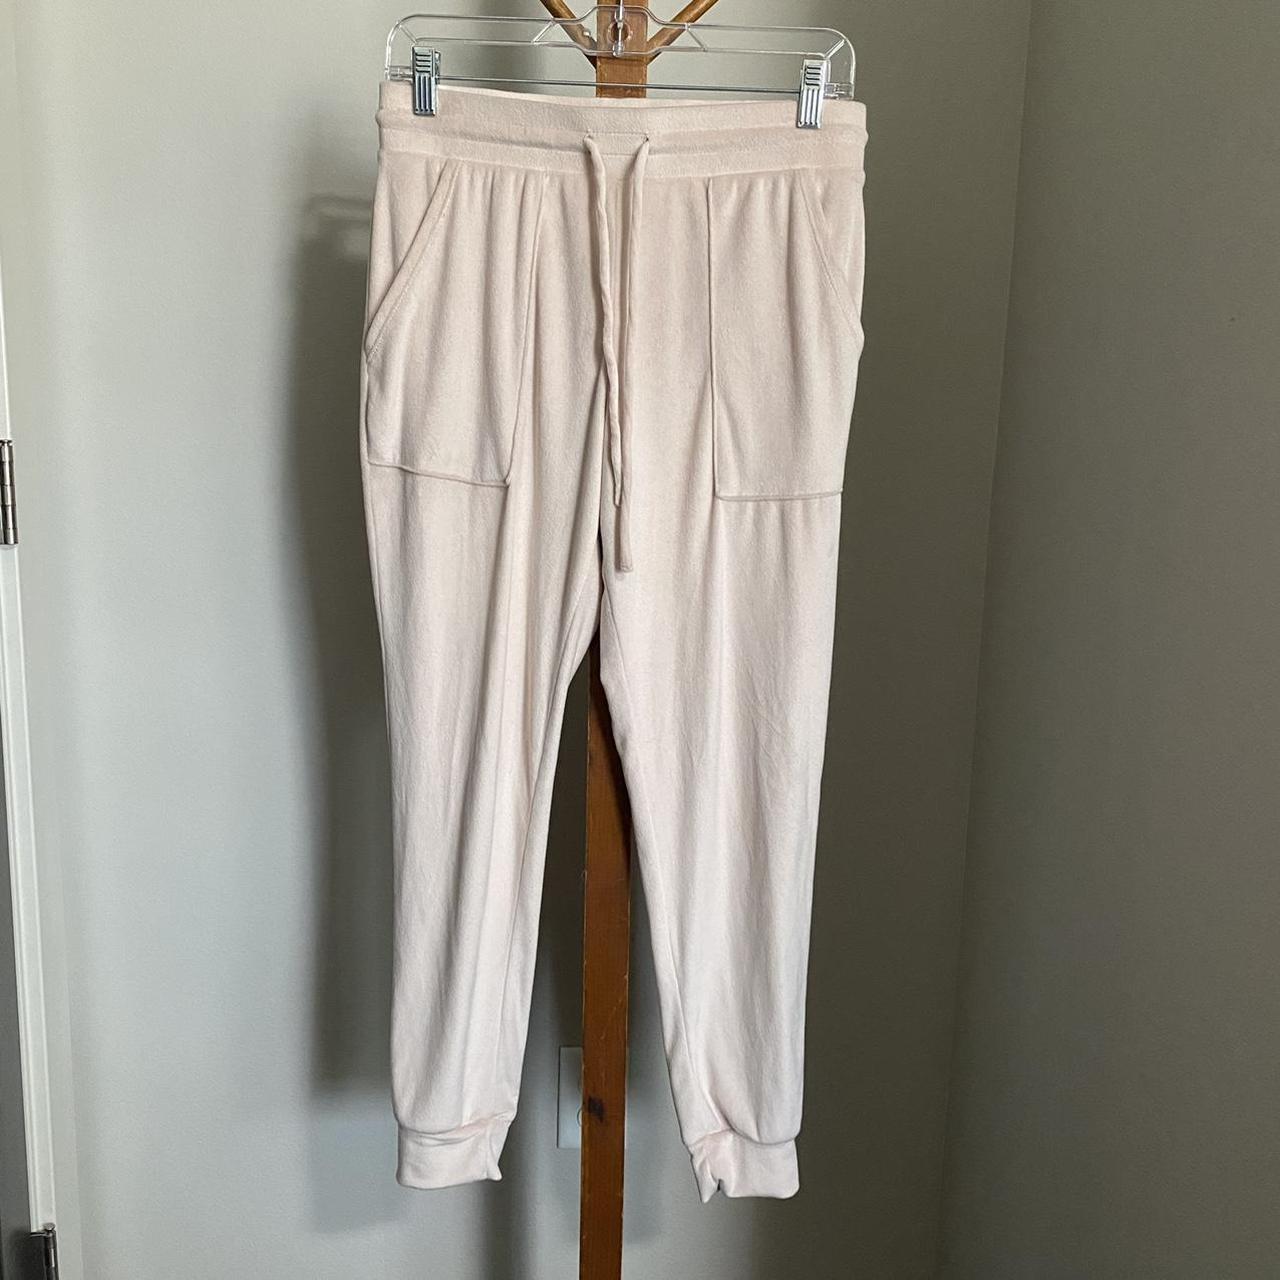 Target Women's Pink and Cream Joggers-tracksuits | Depop